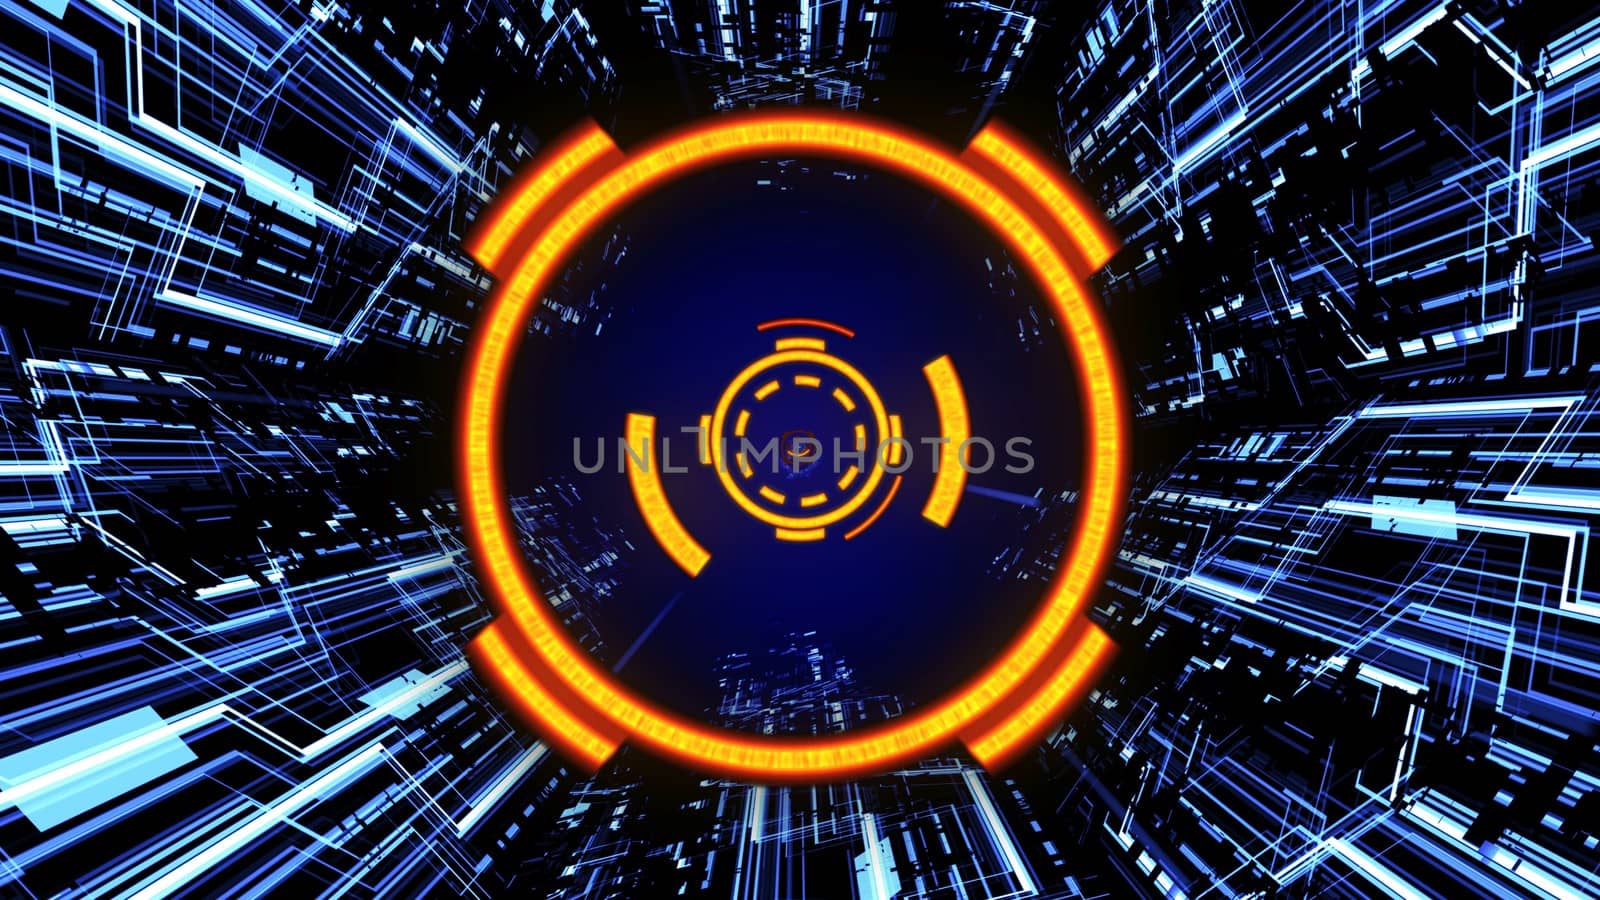 3D Abstract Futuristic Digital Circuit Board Tunnel HUD including Energy Circles with Glowing Light Blue Vibrance Color Waves Background Ver.3 of 3 by ariya23156